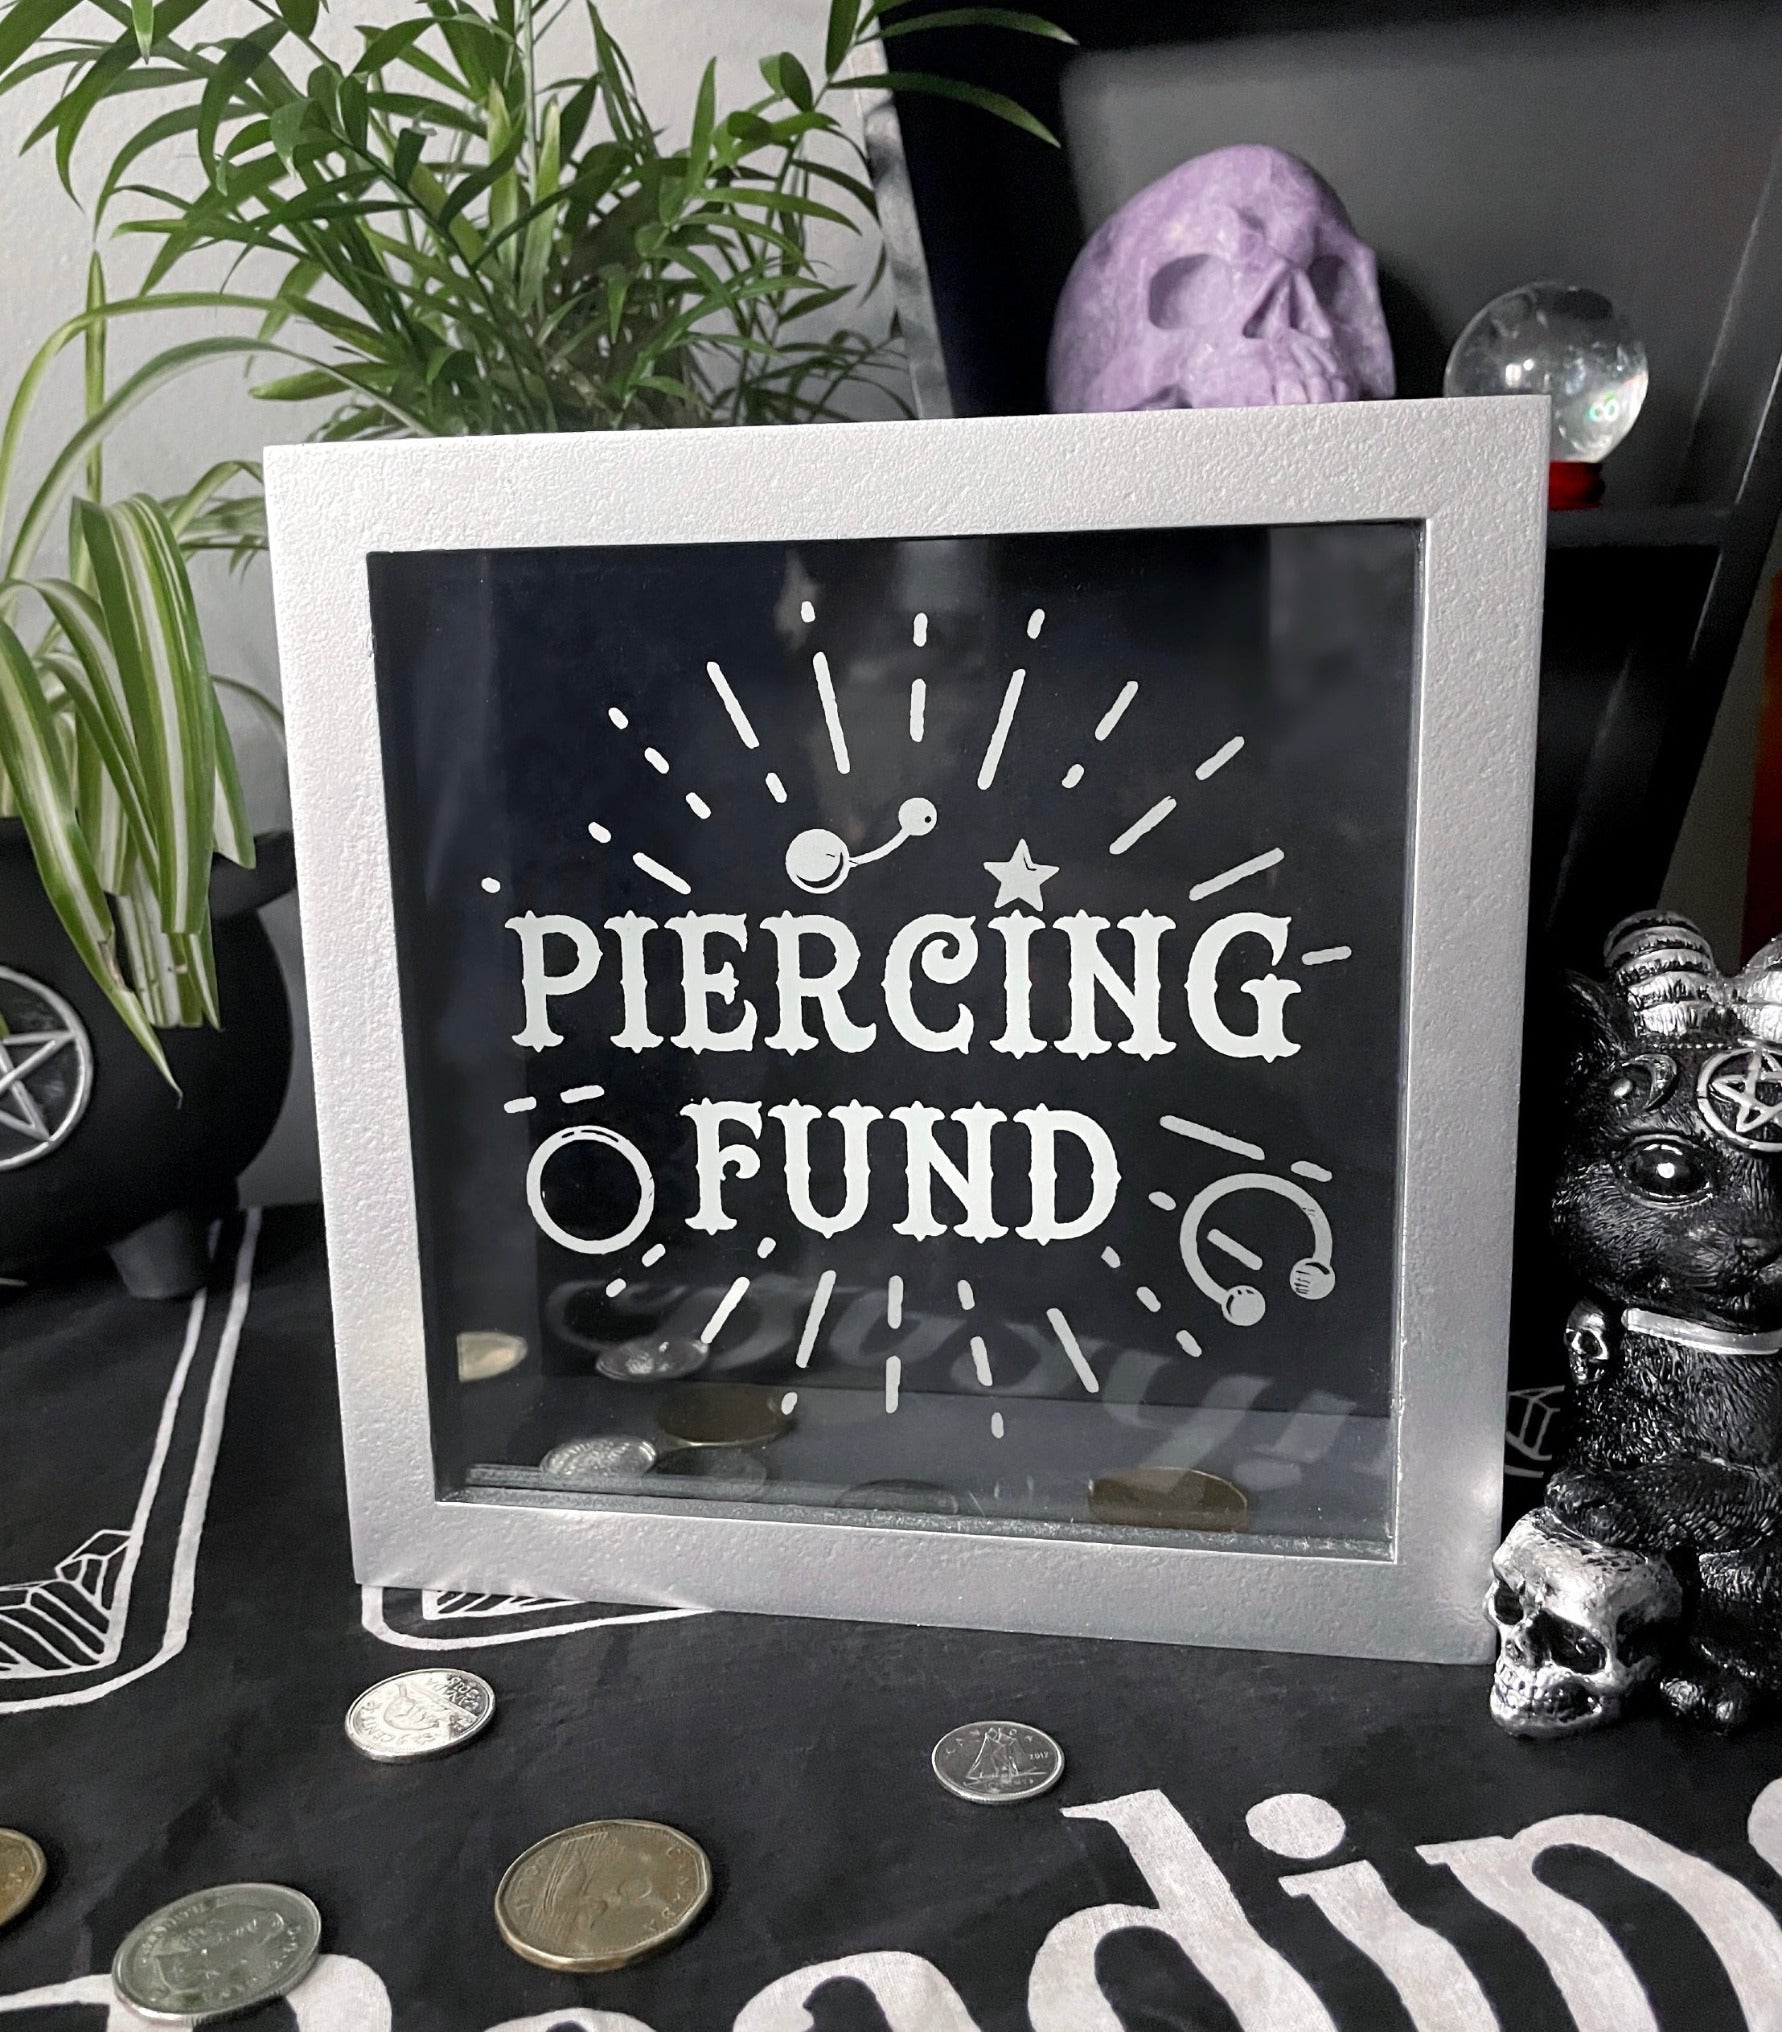 Pictured is a piggy bank or money box with the words "piercing fund" on the front.